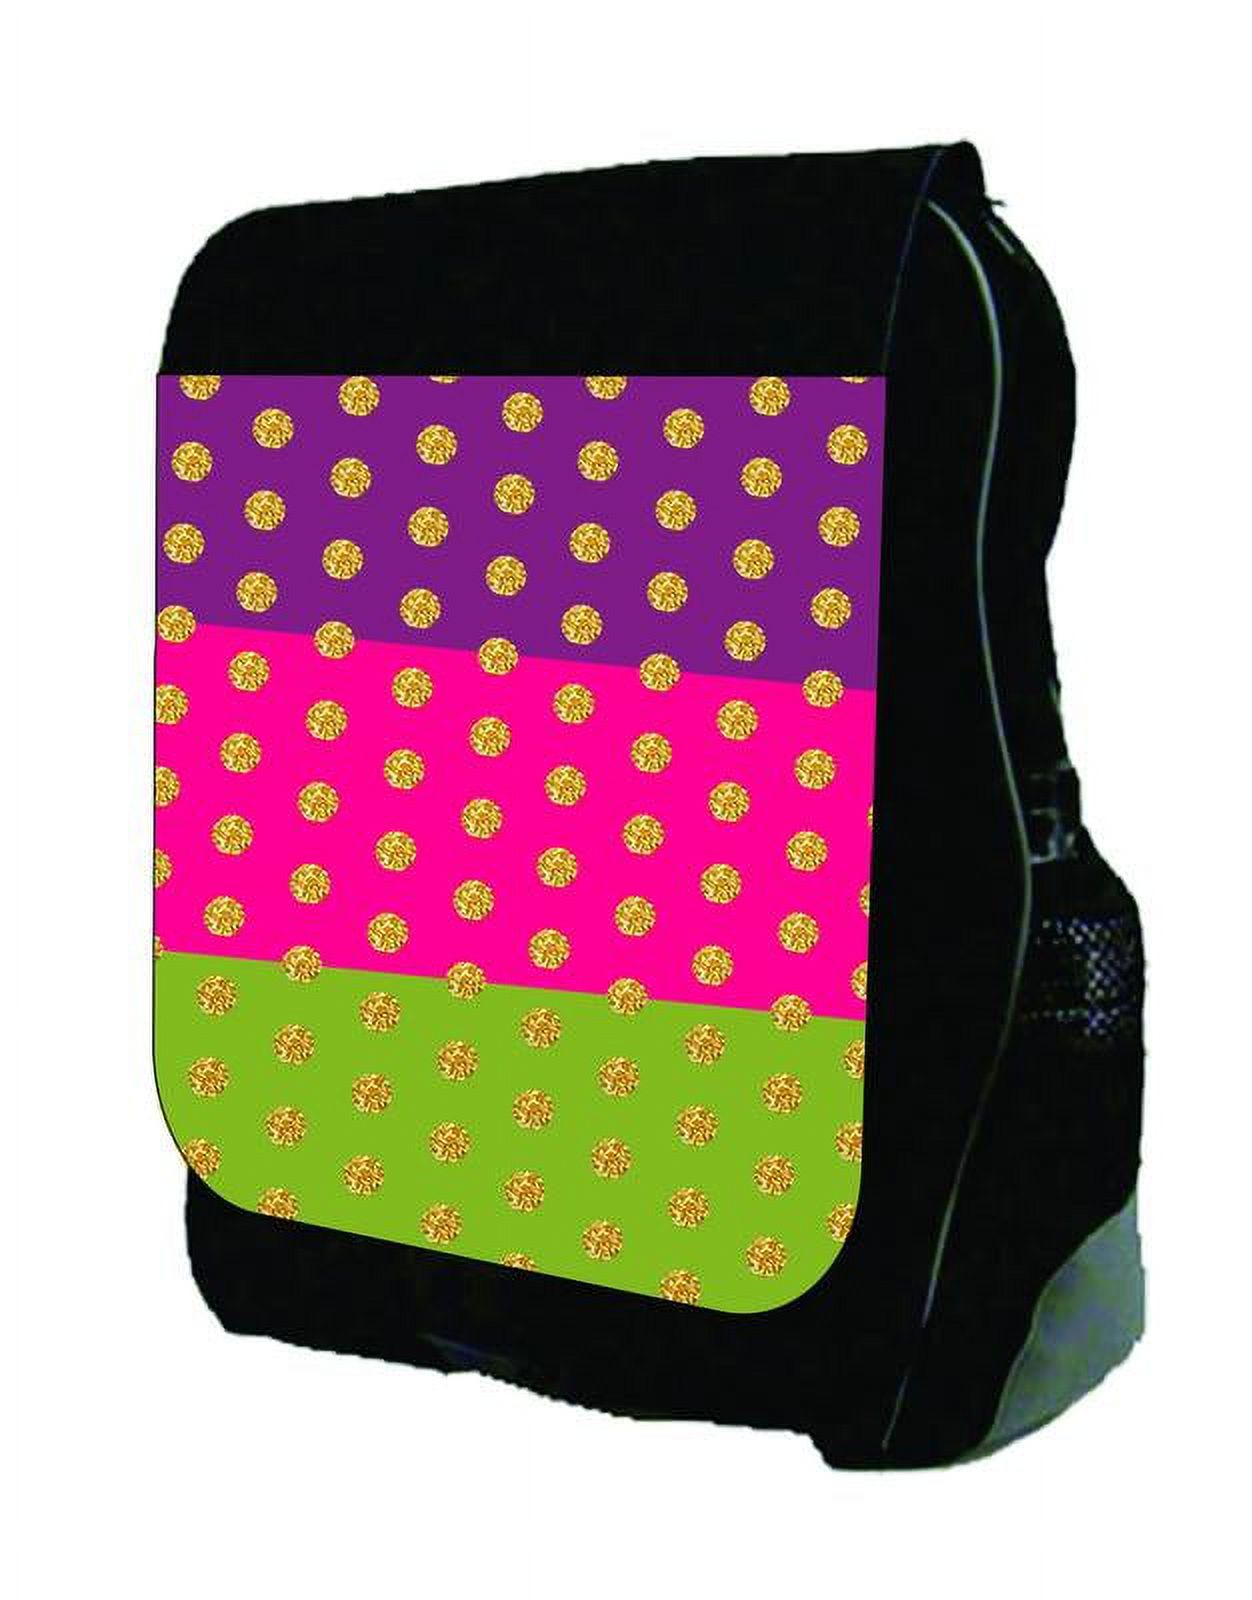 Purple, Hot Pink, Lime Colorblocked Stripes with Gold Polka Dots  - Black School Backpack - image 2 of 4